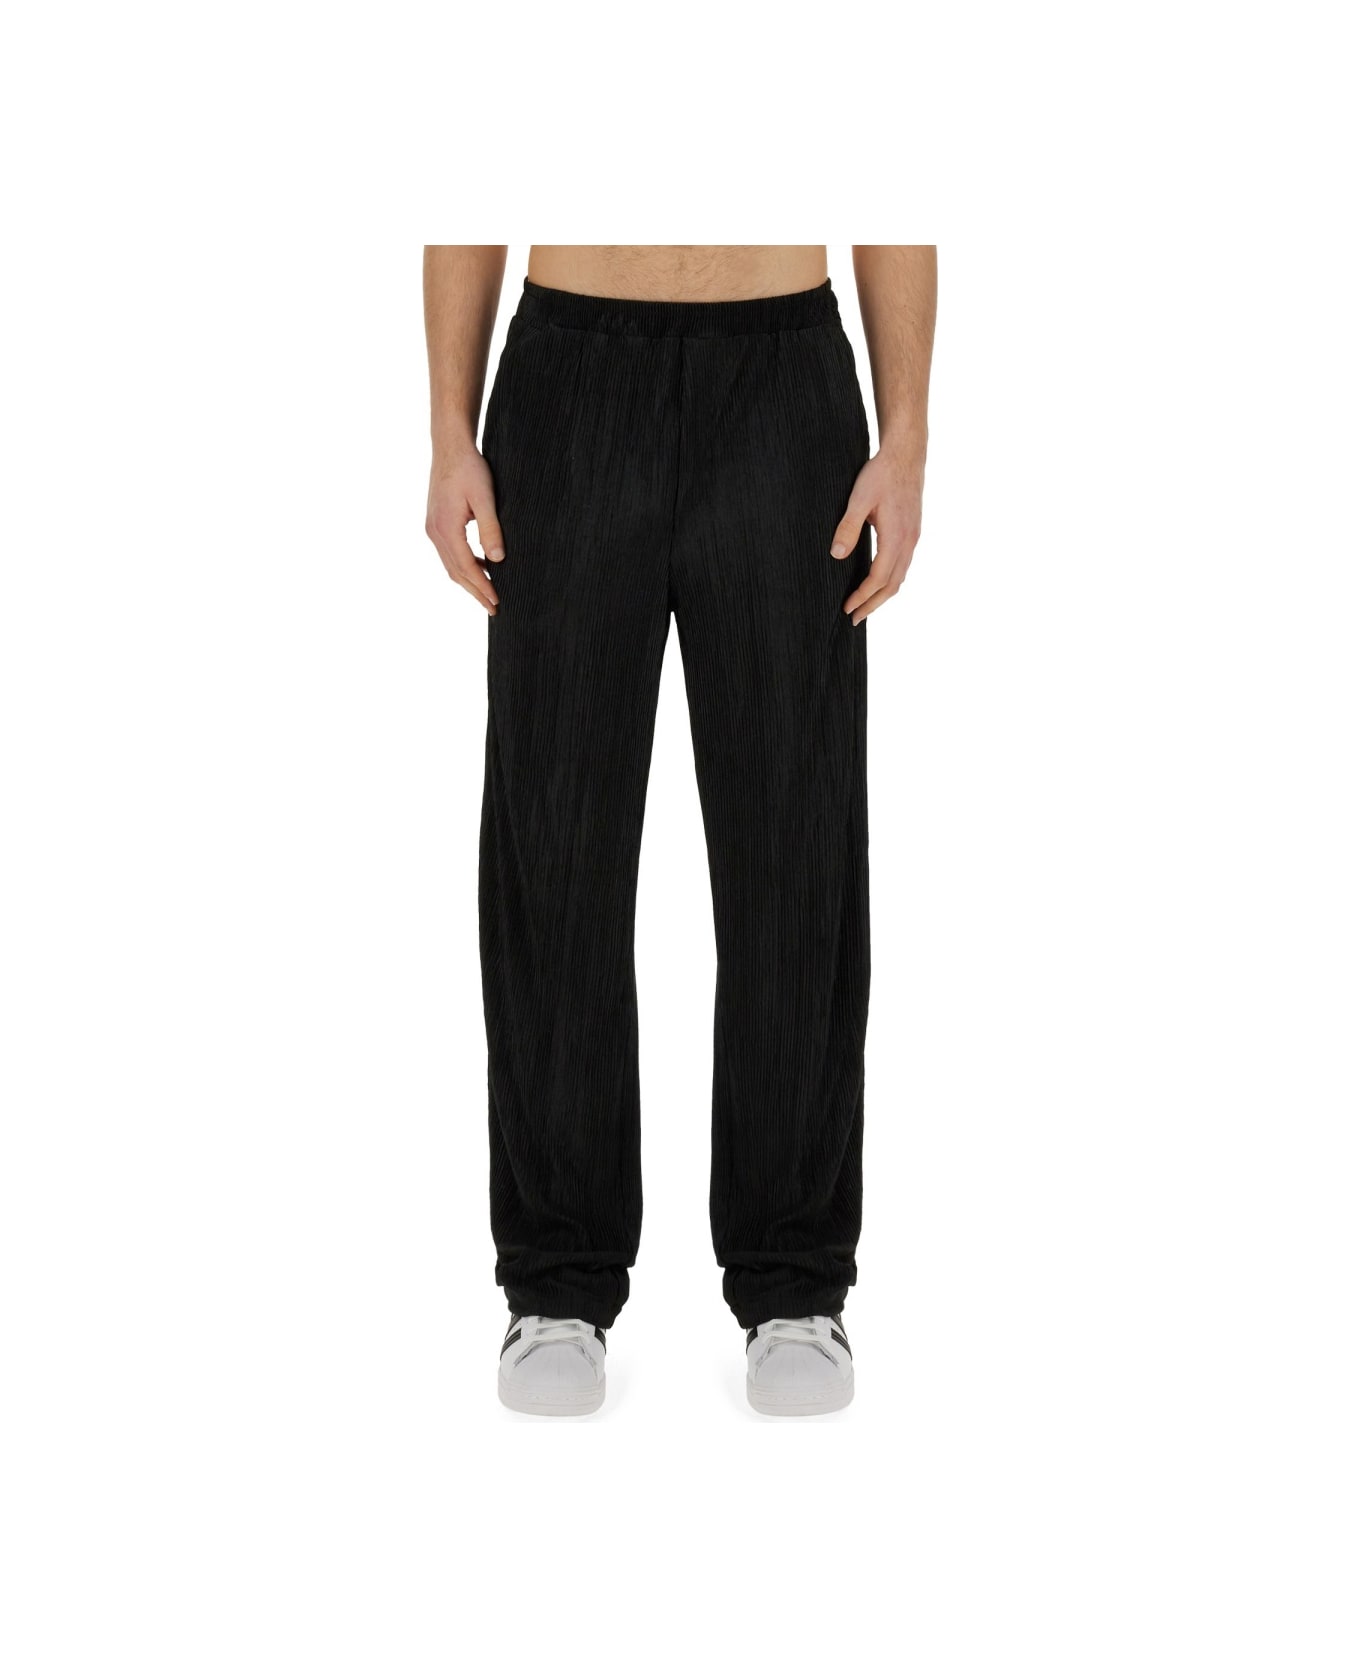 Family First Milano Pleated Pants - BLACK